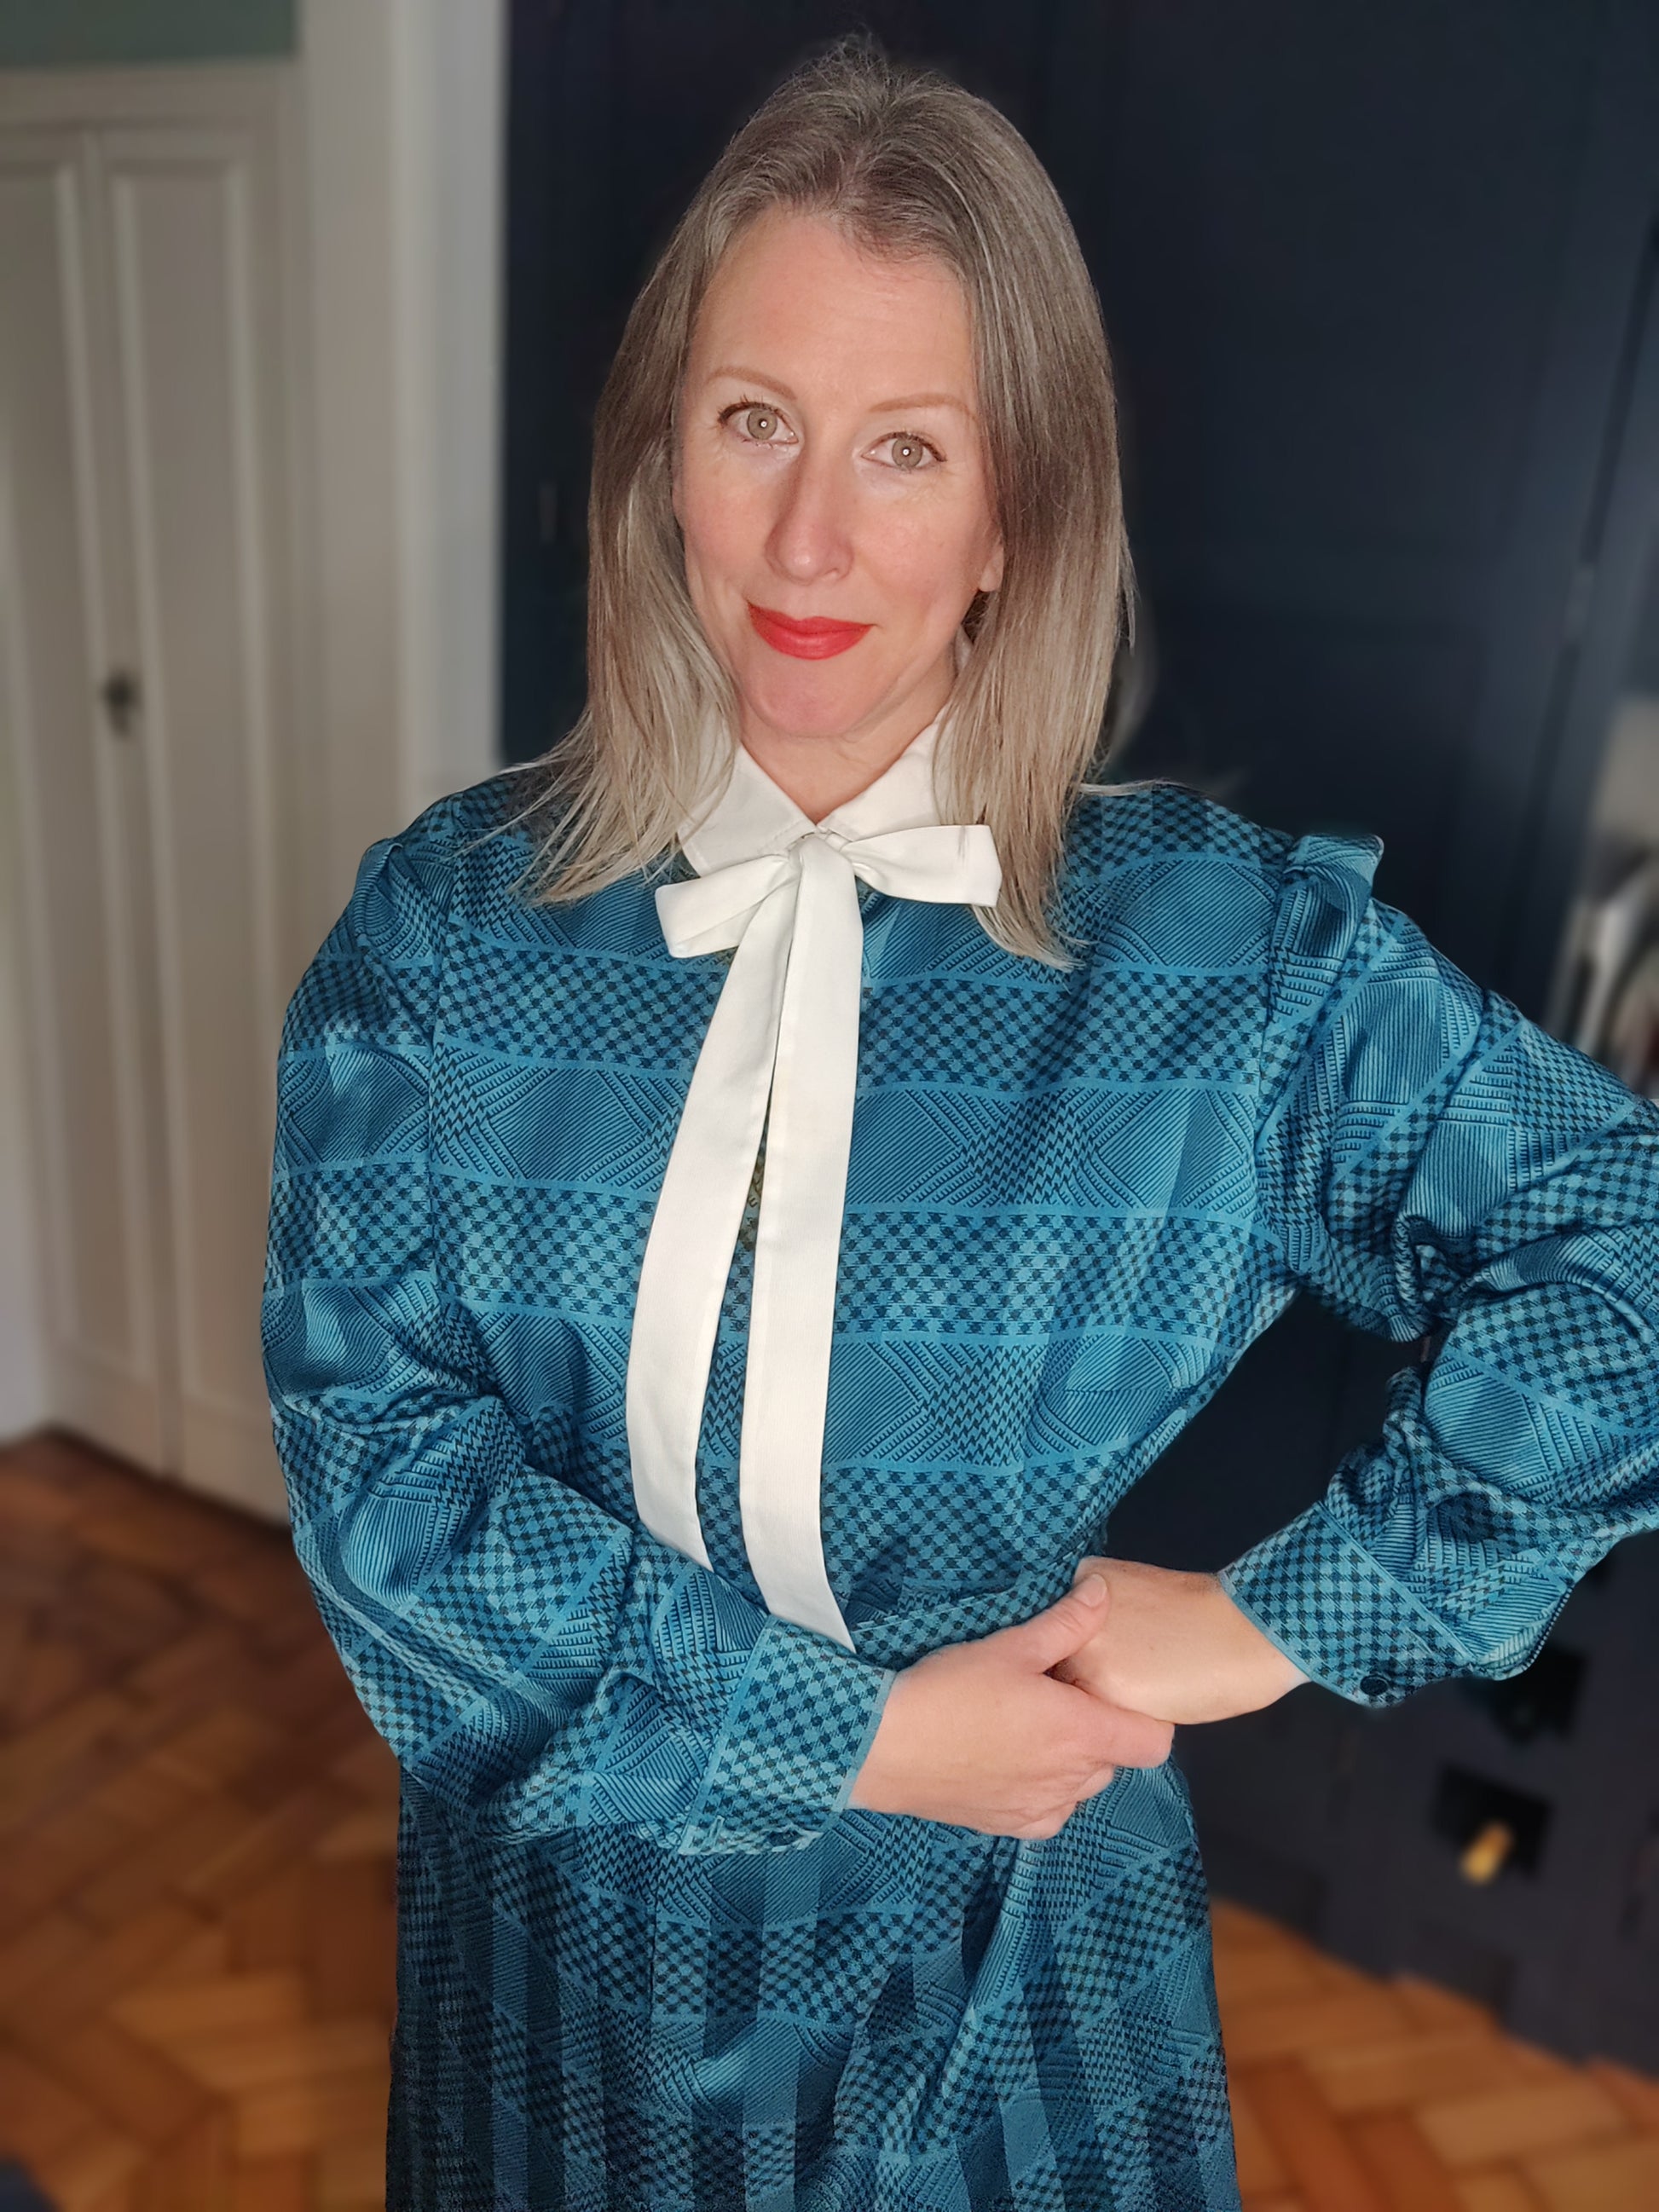 Blue and black 80s check dress